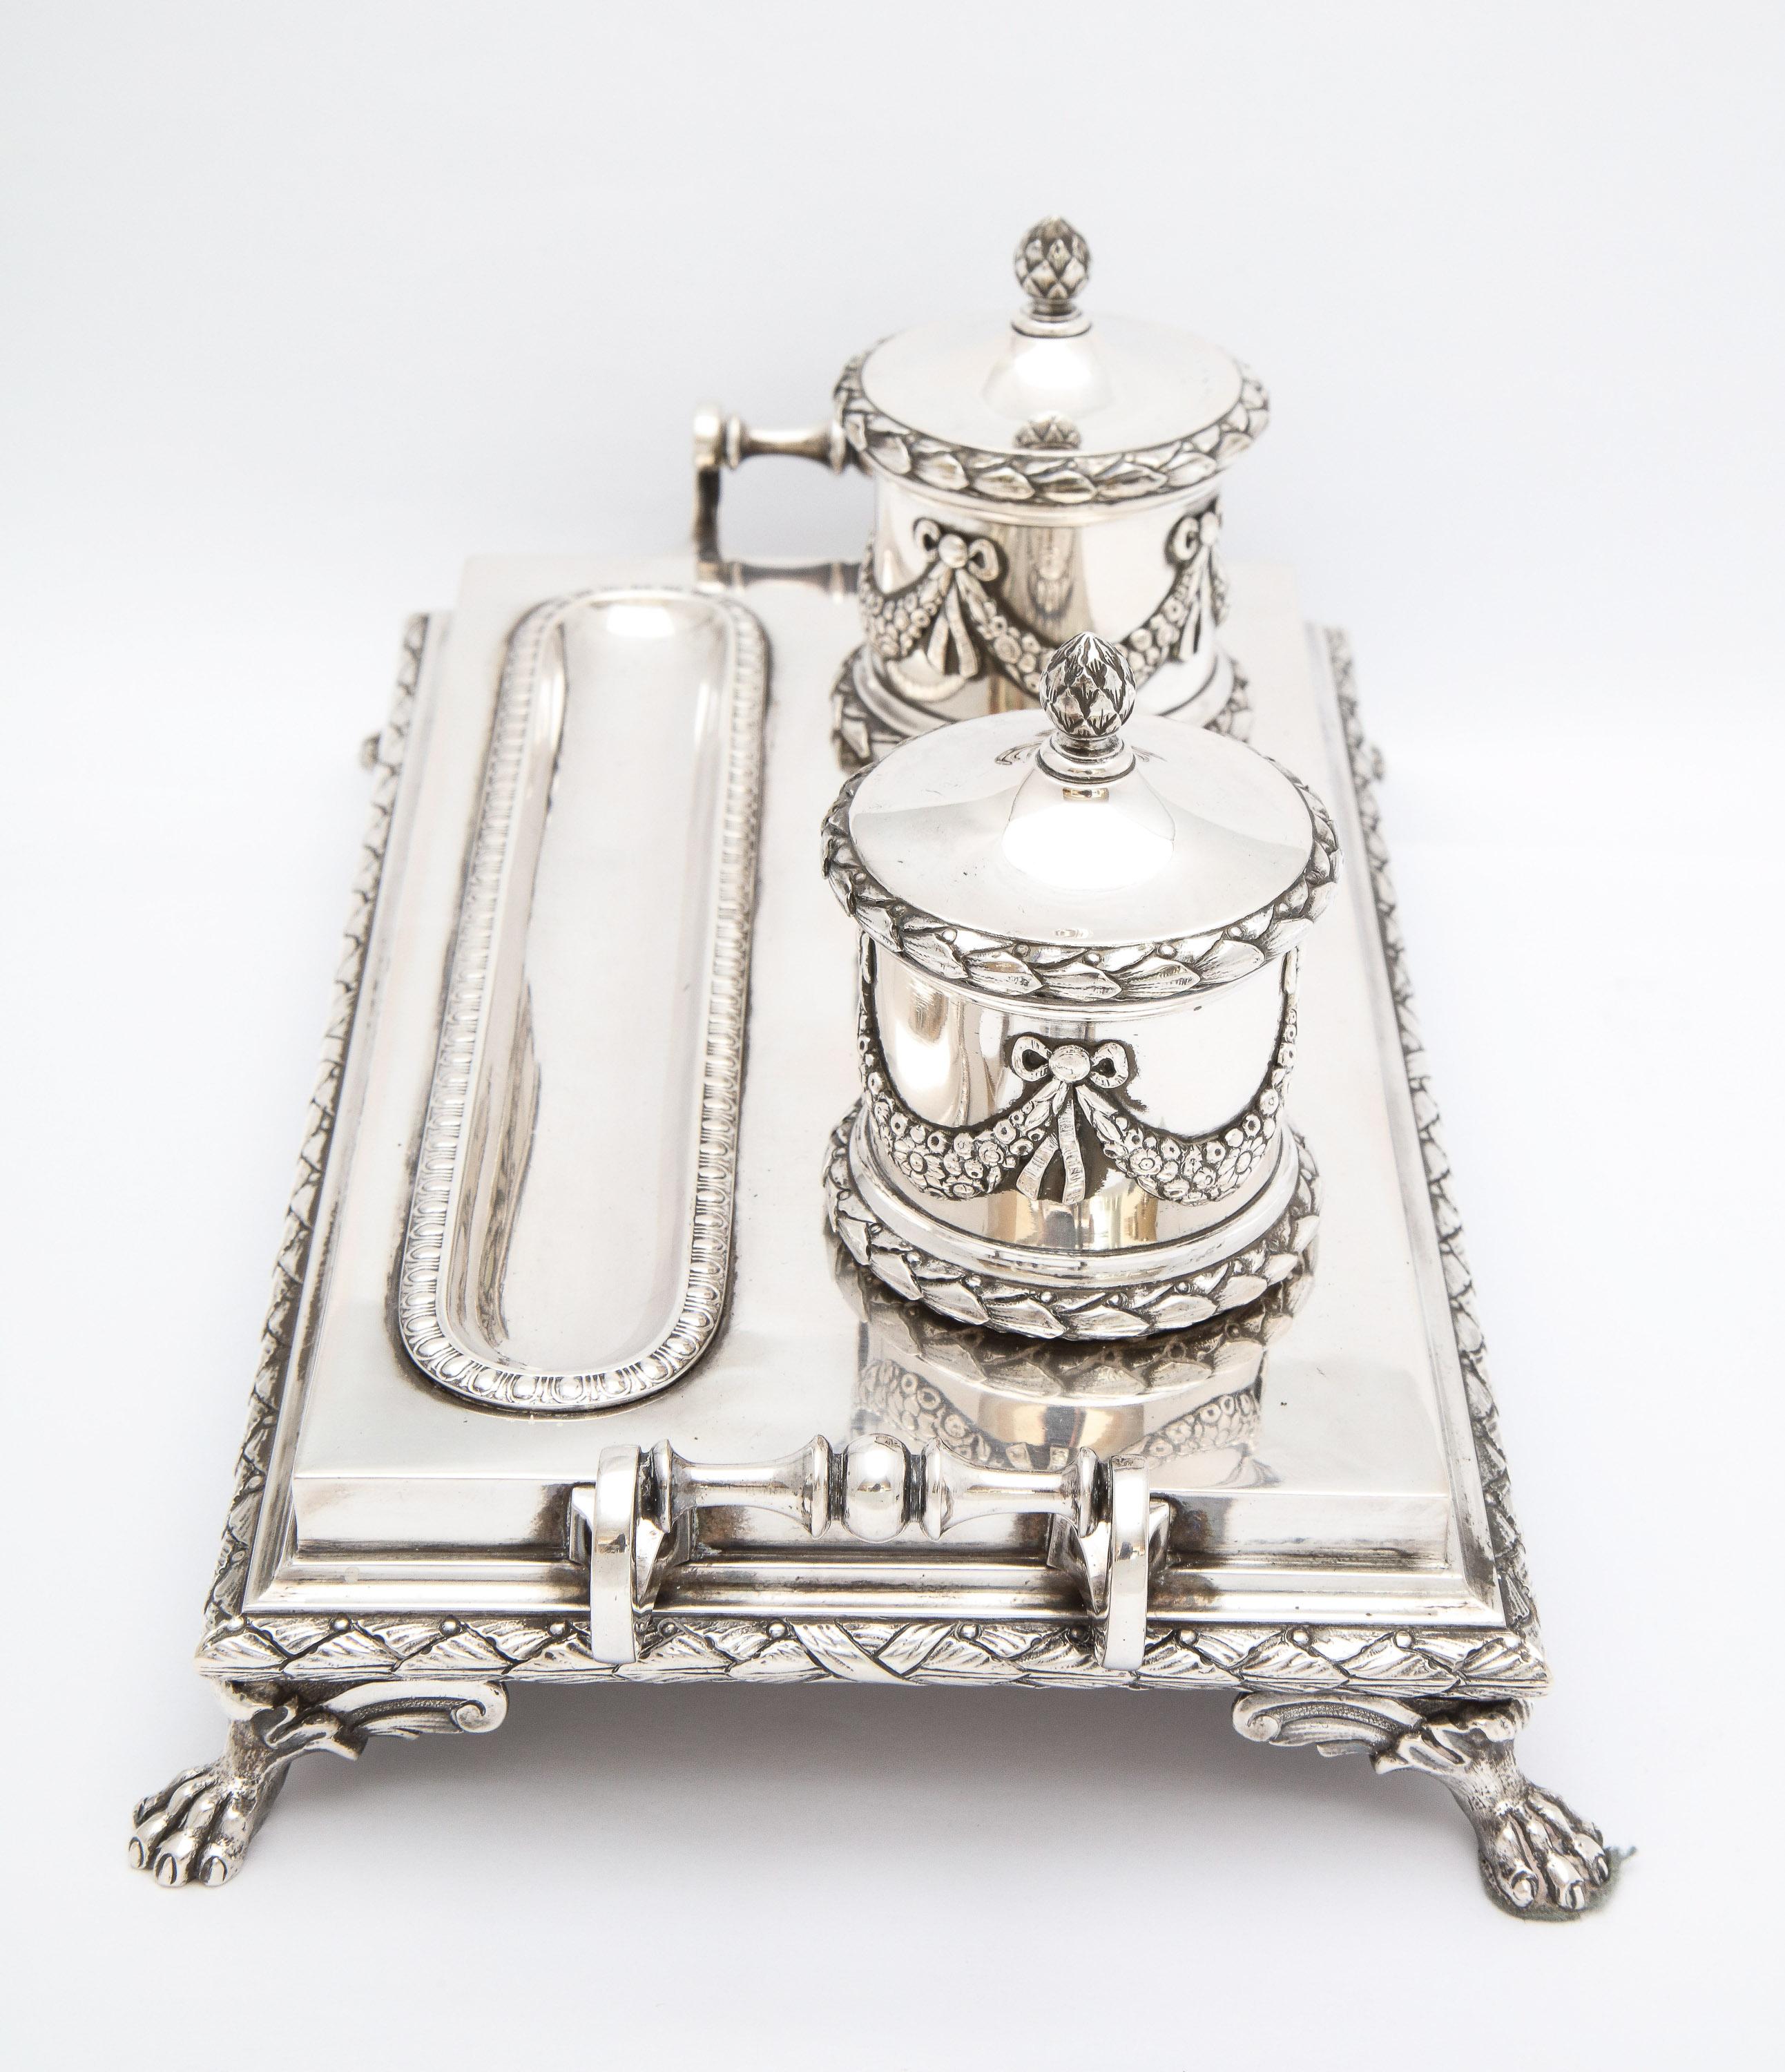 Neoclassical-Style Continental Silver '.800' Footed Double Inkstand by Dragstead For Sale 3